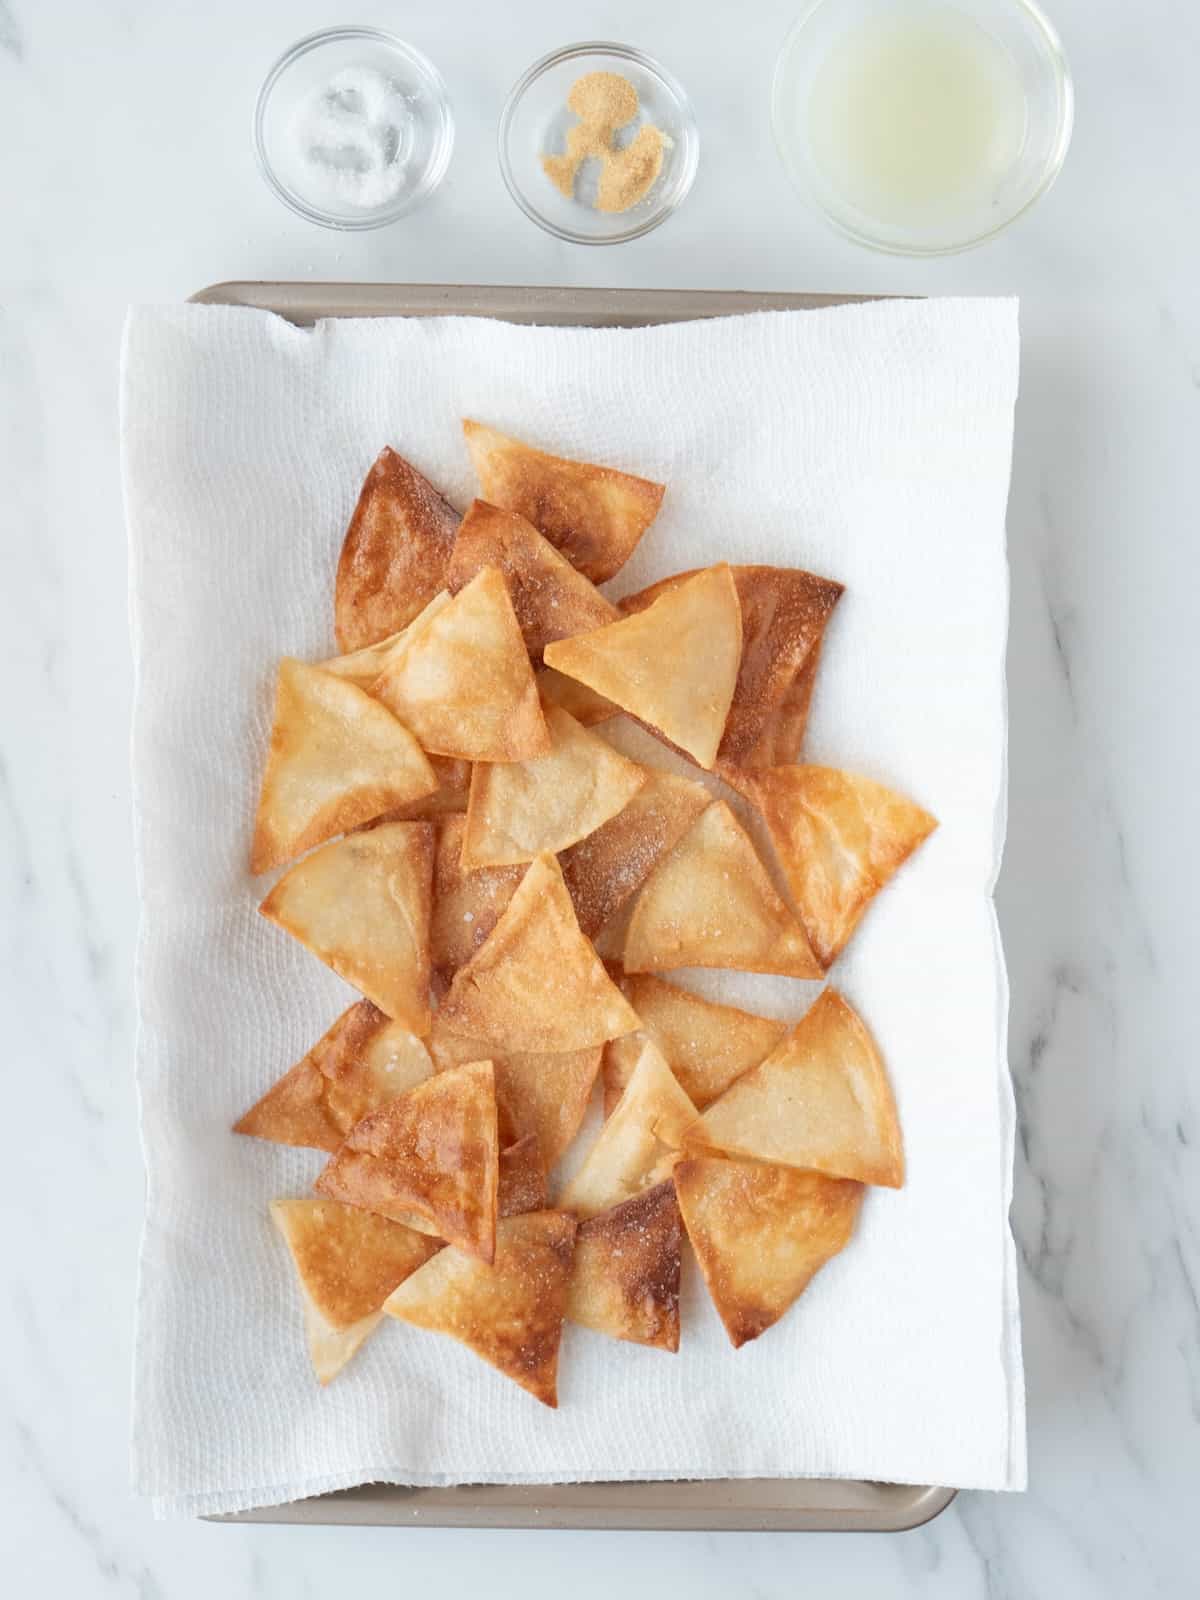 A baking sheet lined with tissues with freshly fried tortilla chips, with three small glass mixing bowls of salt, garlic powder and lime juice on the side.